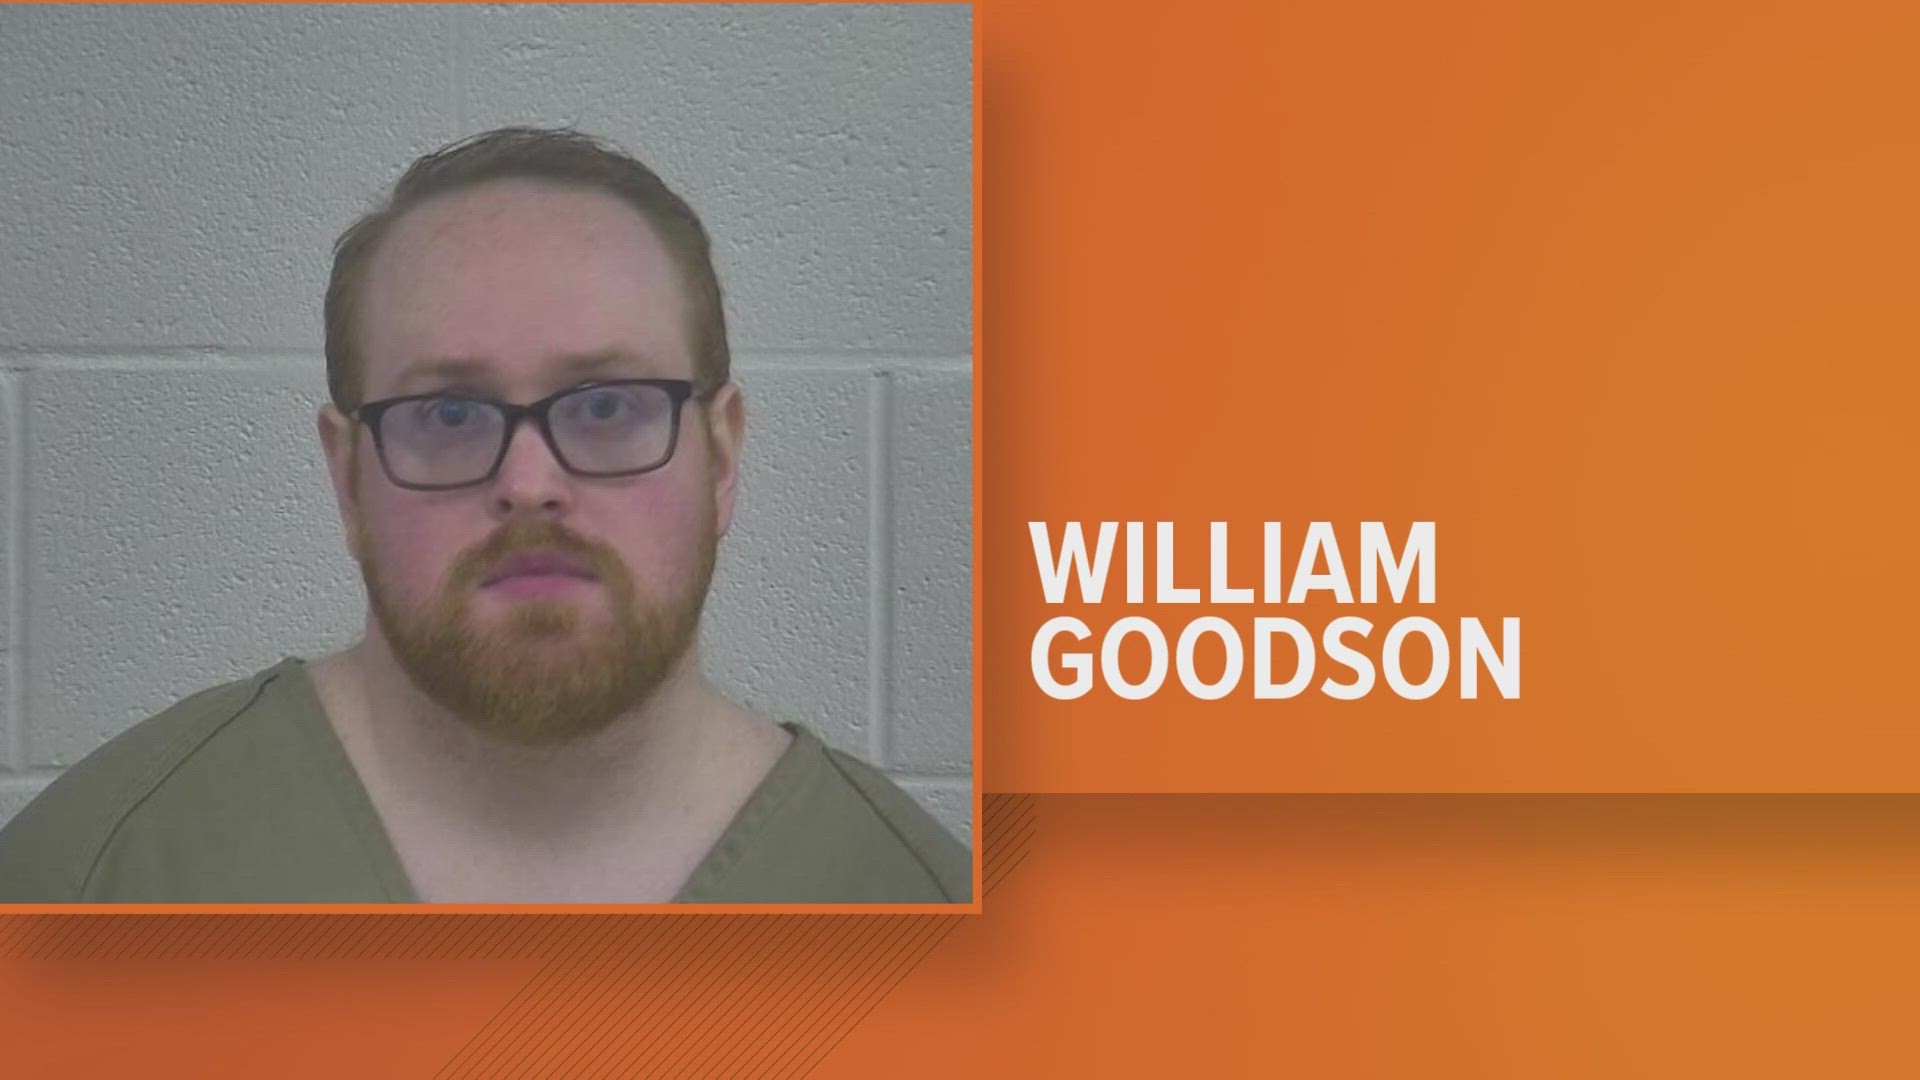 The London Police Department said William Goodson was arrested after detectives looked into allegations of inappropriate behavior.